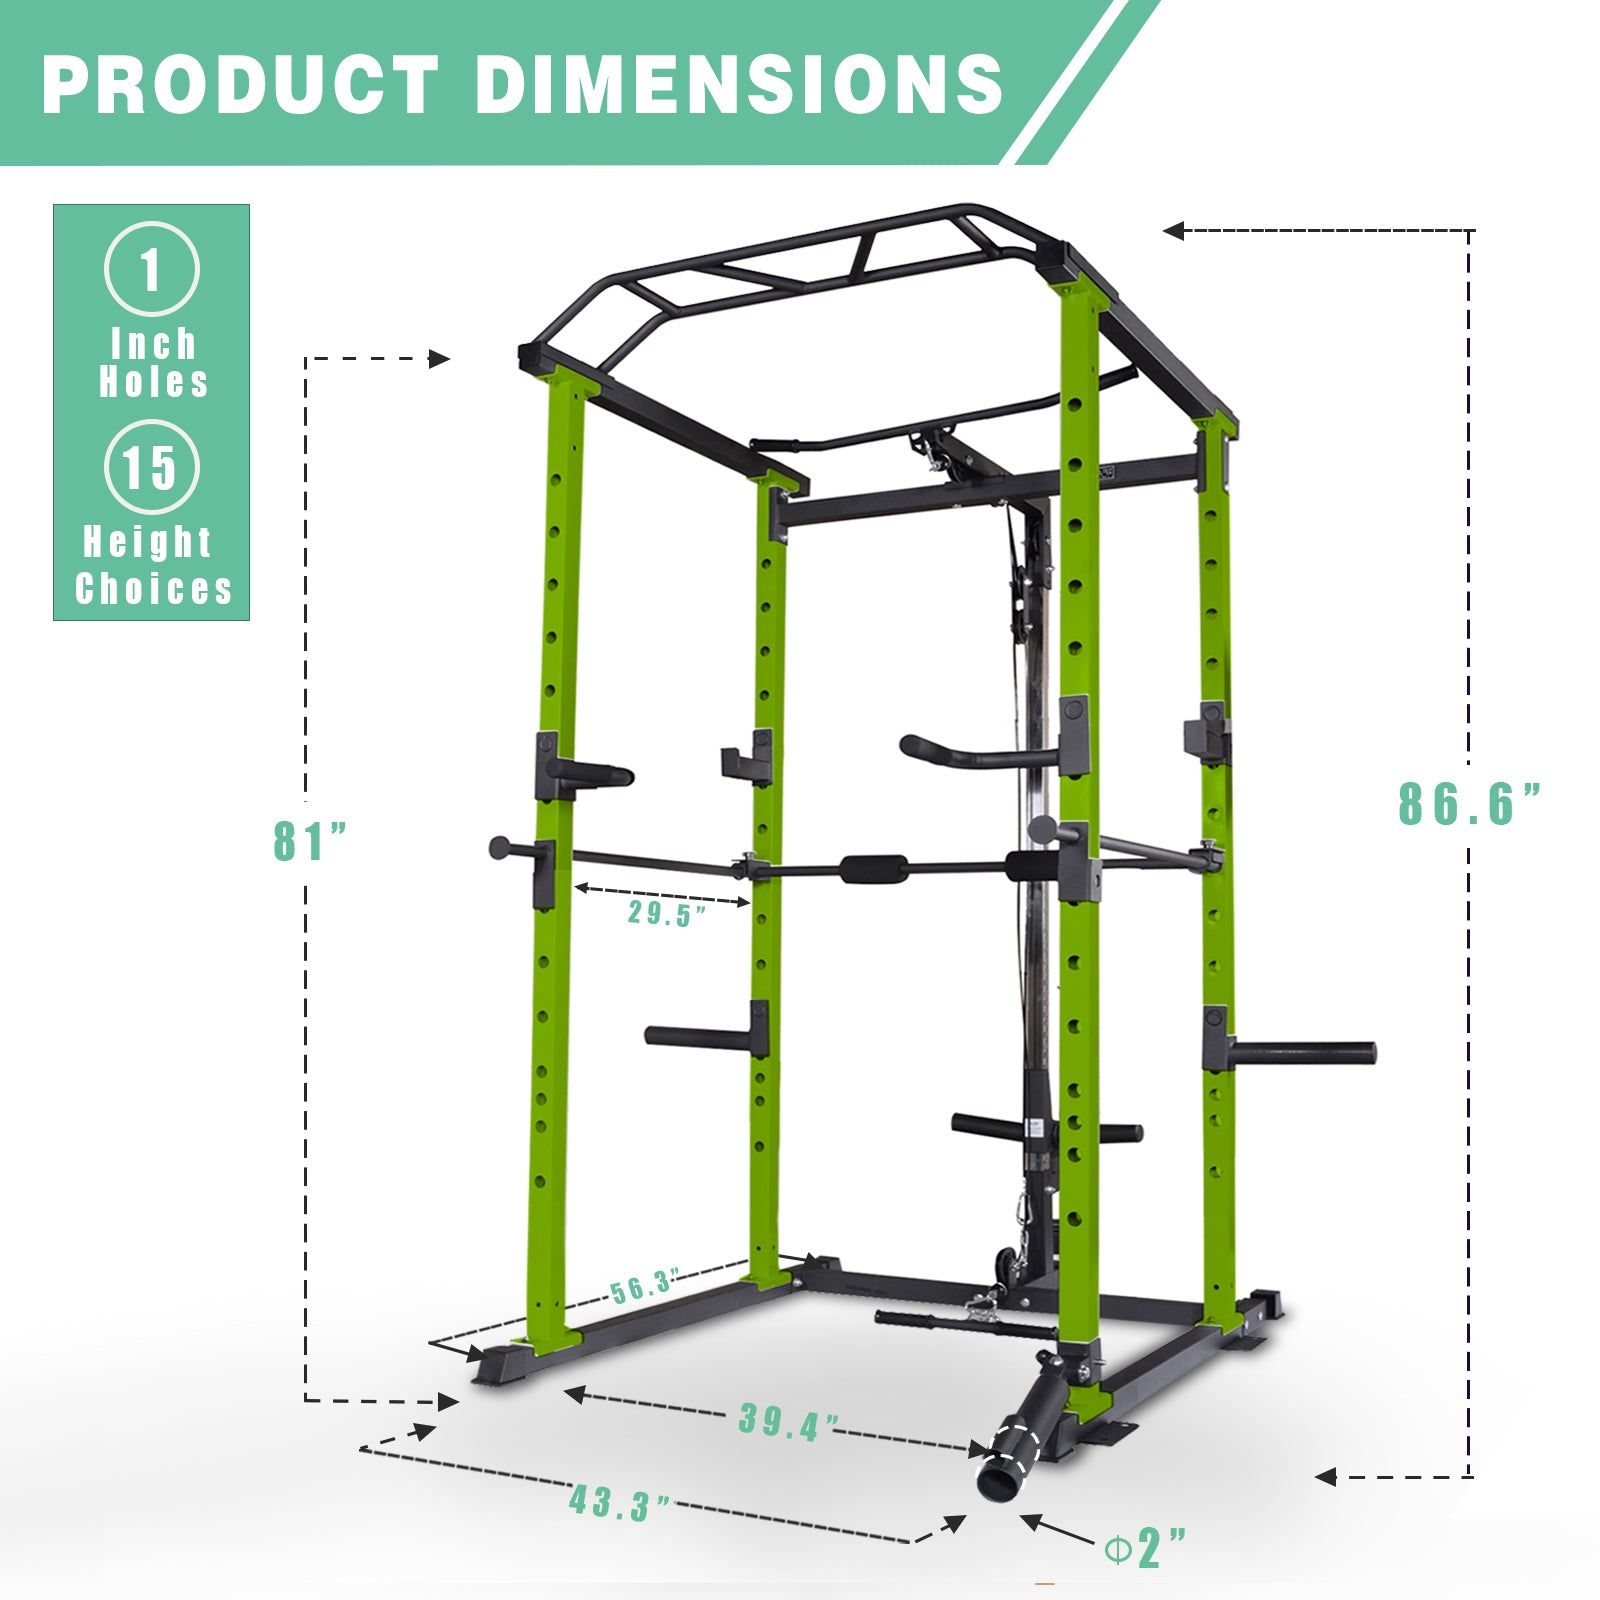 IFAST green power cage dimensions